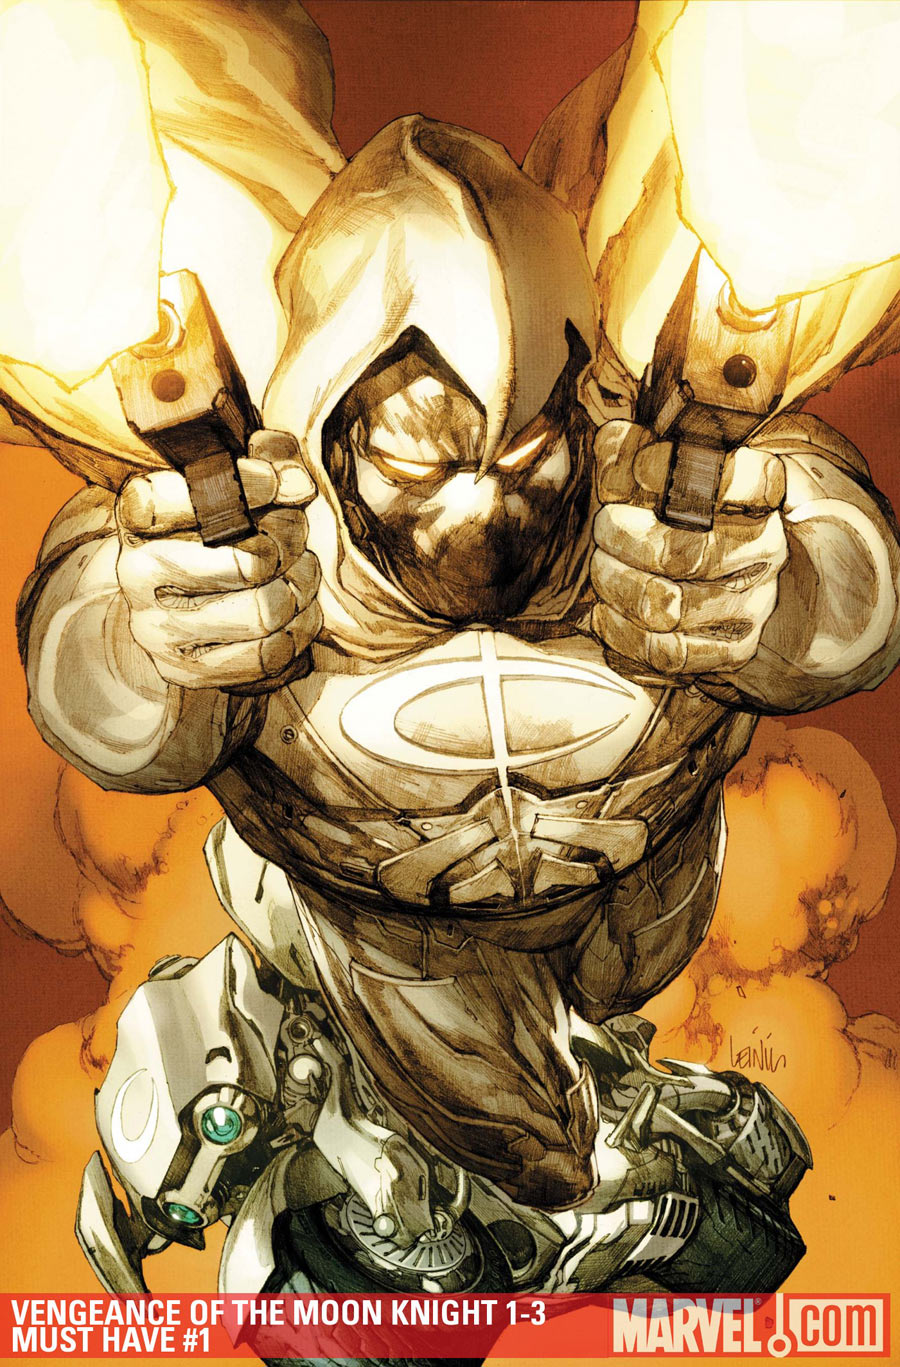 VENGEANCE OF THE MOON KNIGHT #1 MUST HAVE